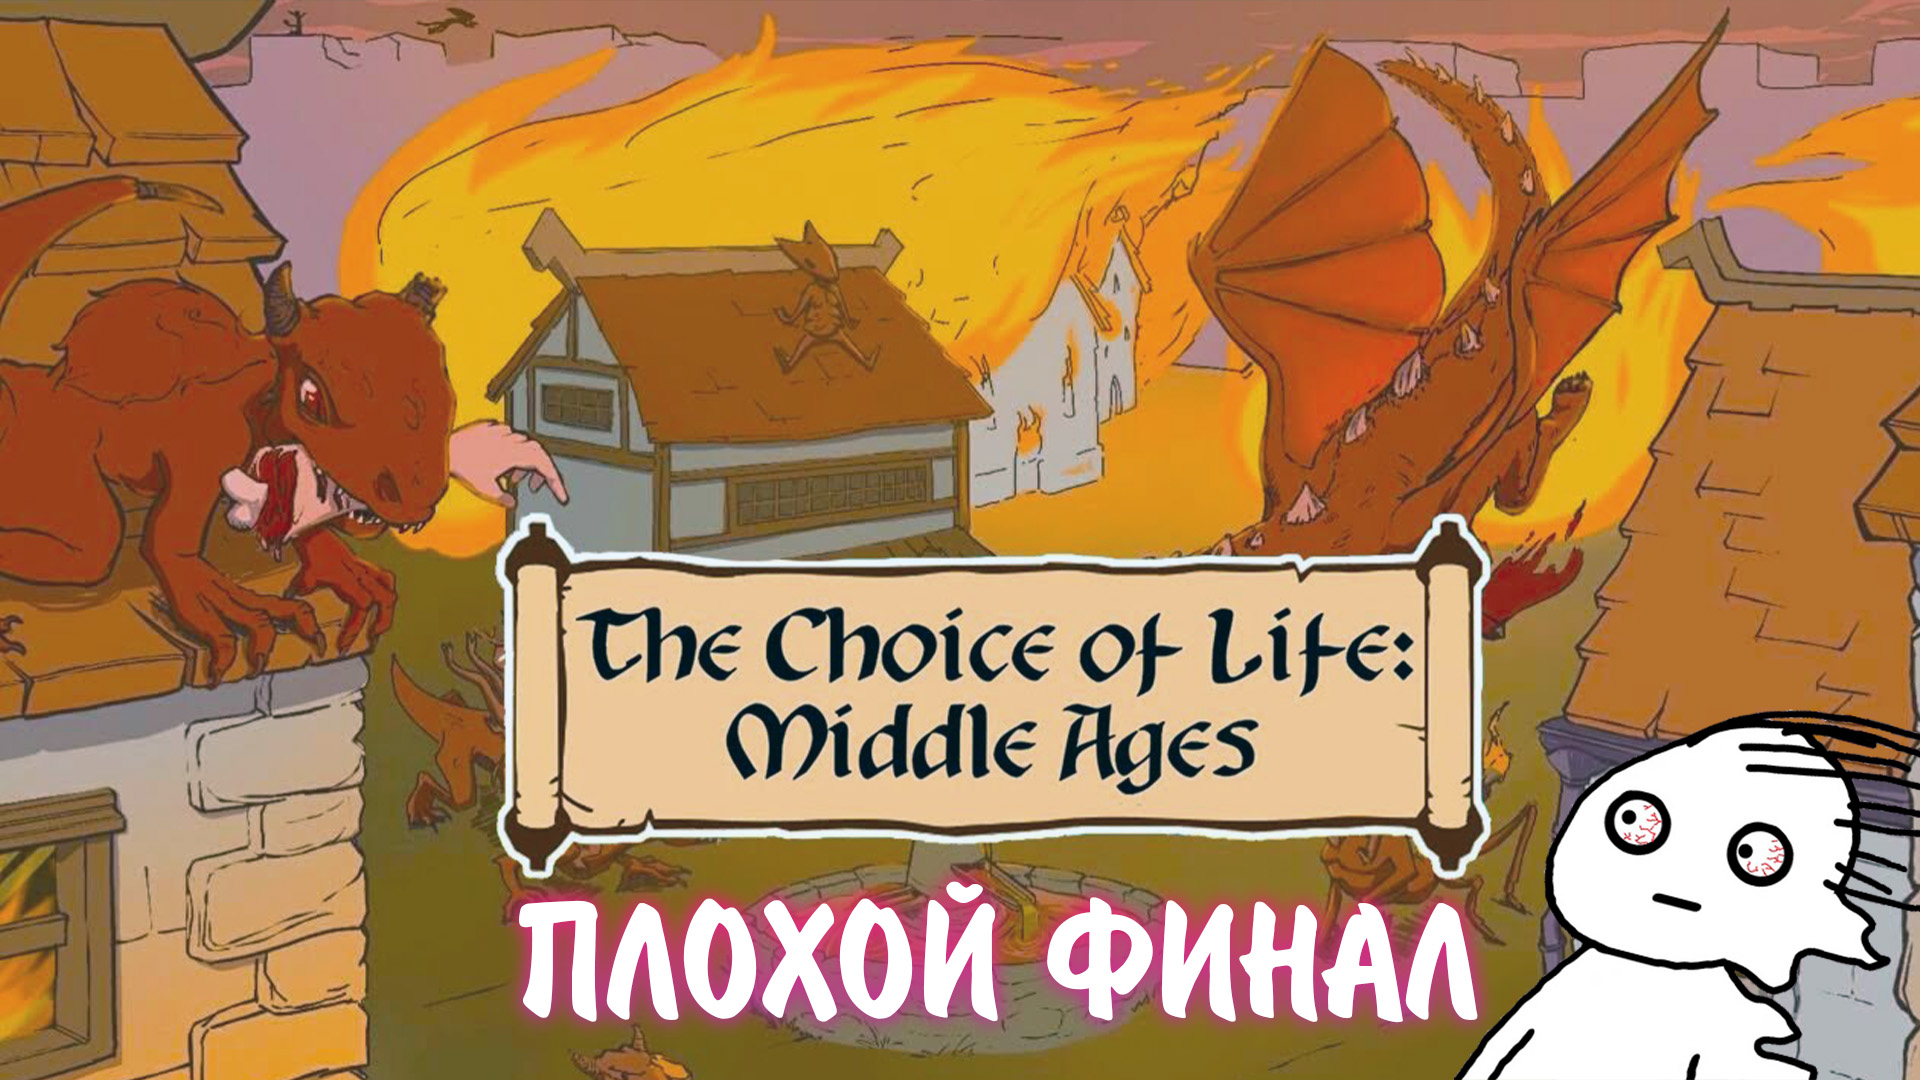 The Choice of Life: Middle Ages #2 - ПЛОХОЙ ФИНАЛ